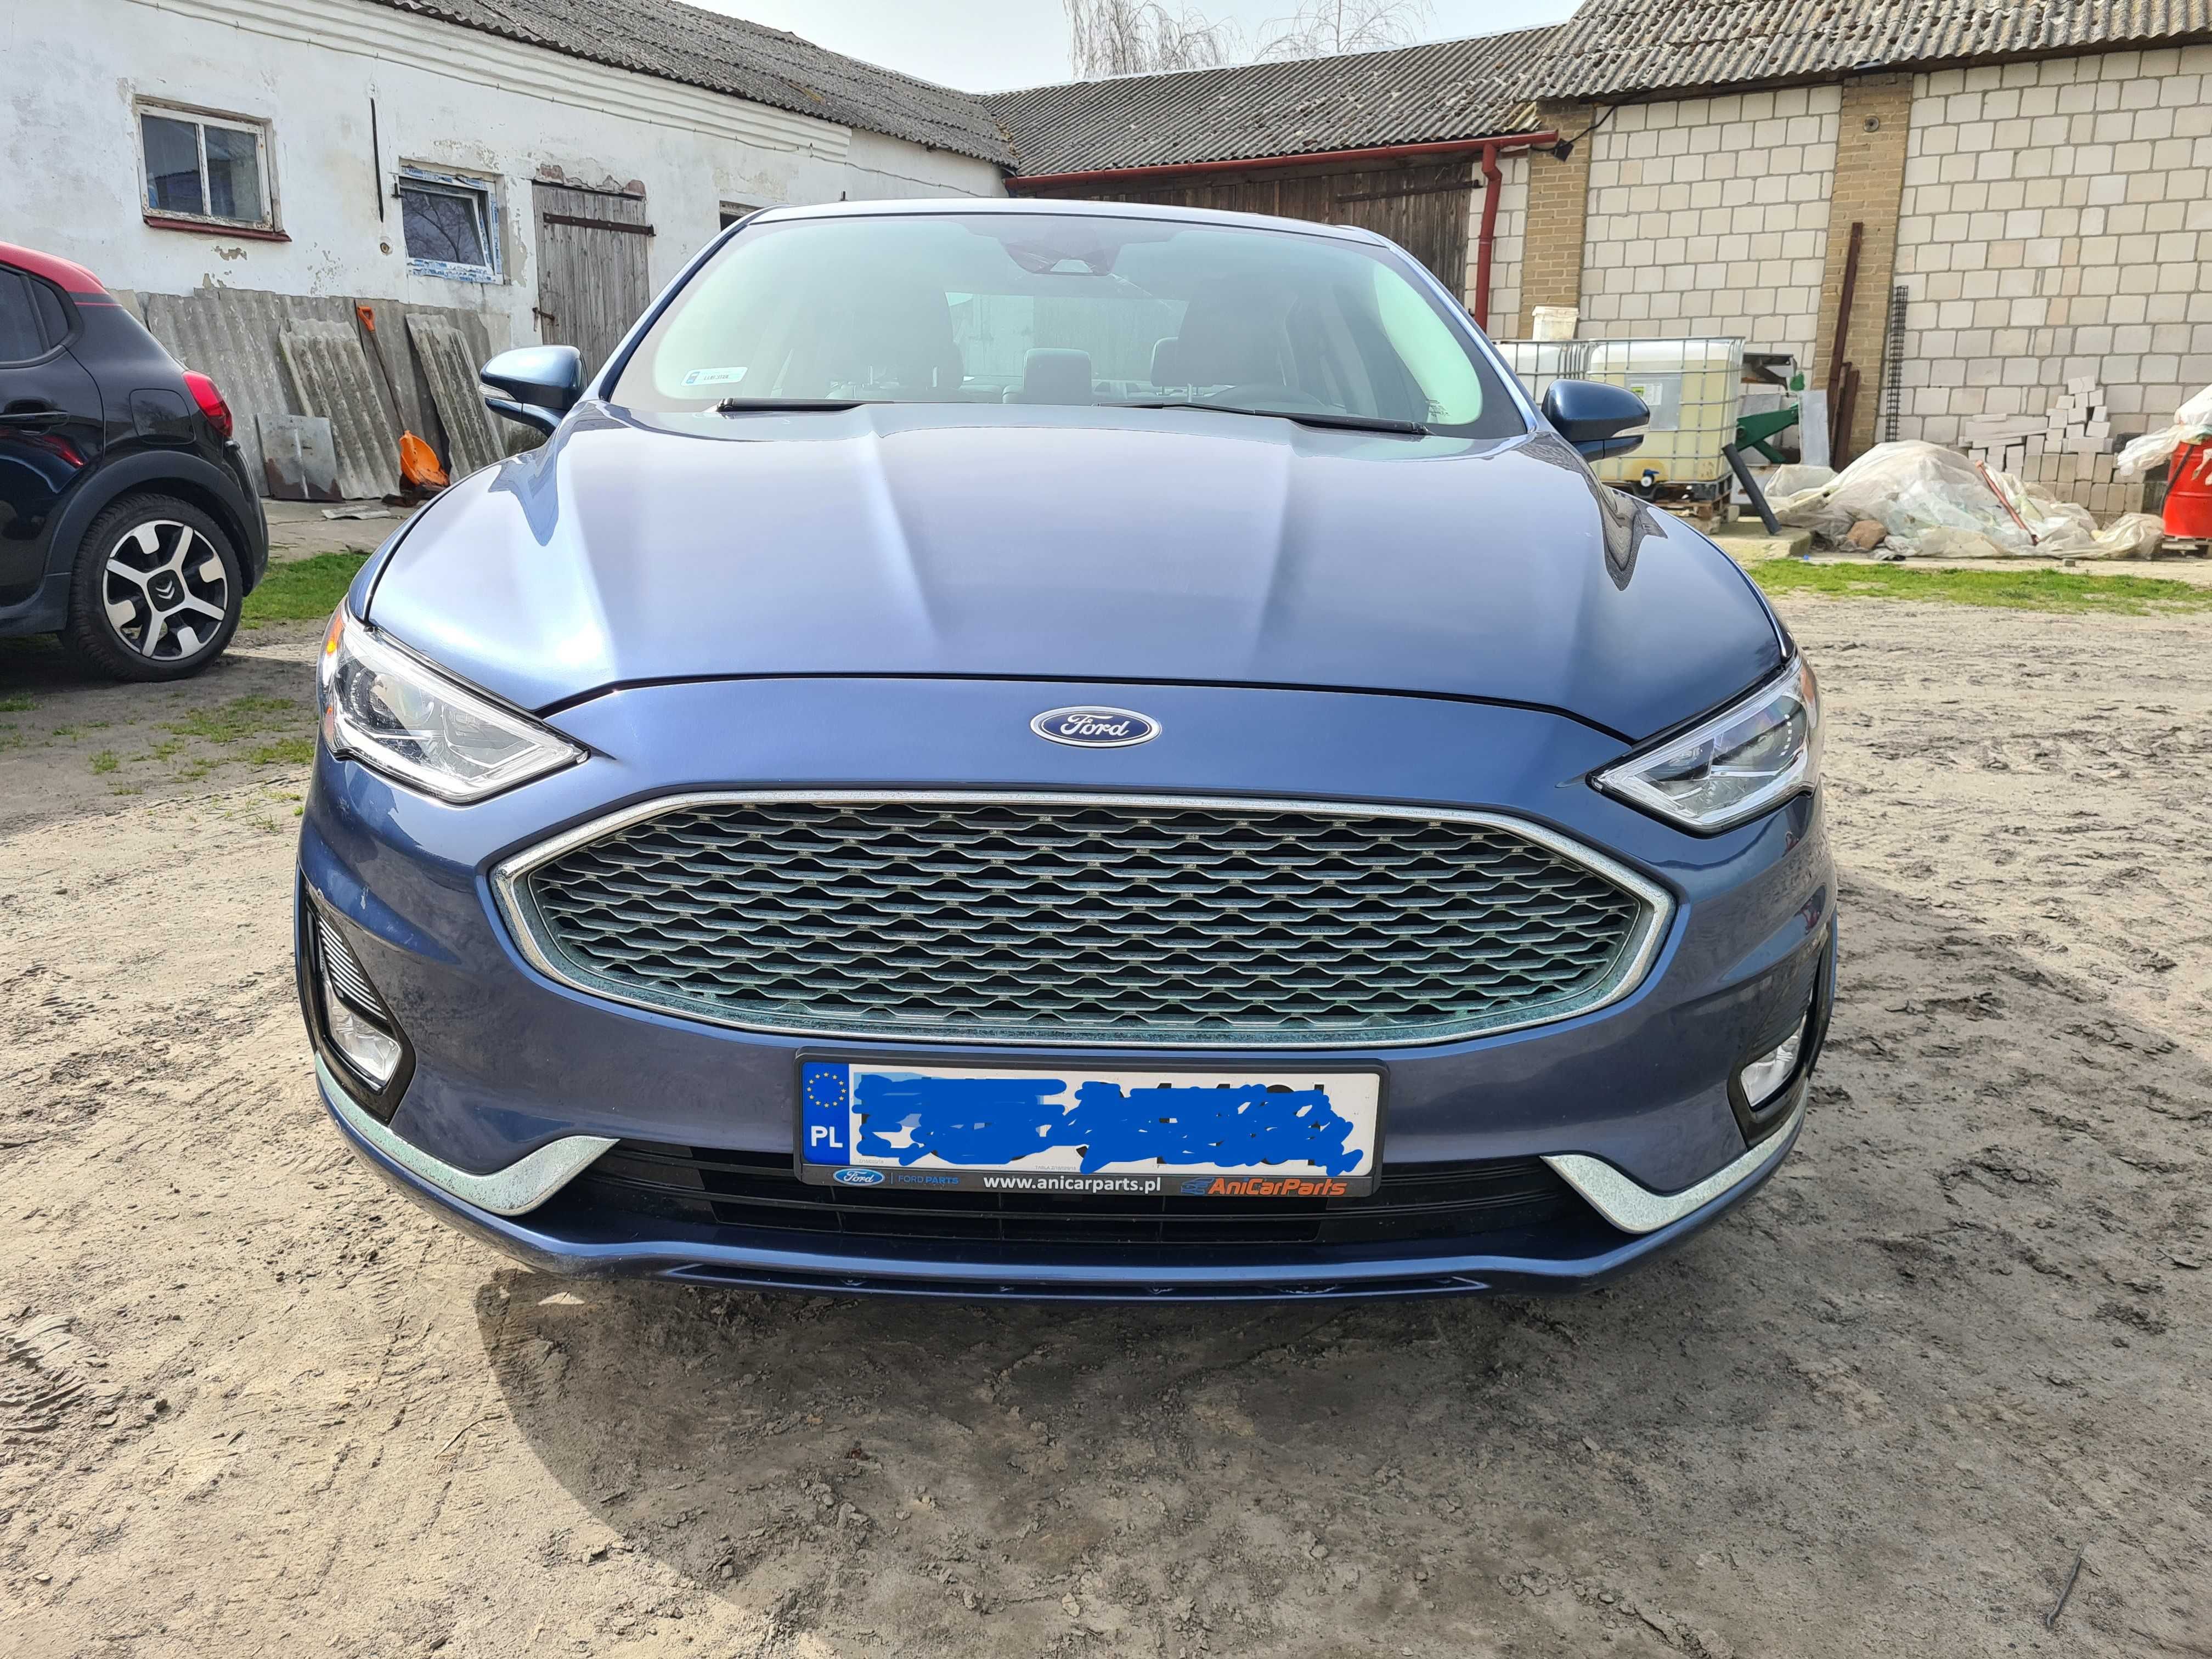 Ford Fusion AWD 240km 2.0 EcoBoost 4x4